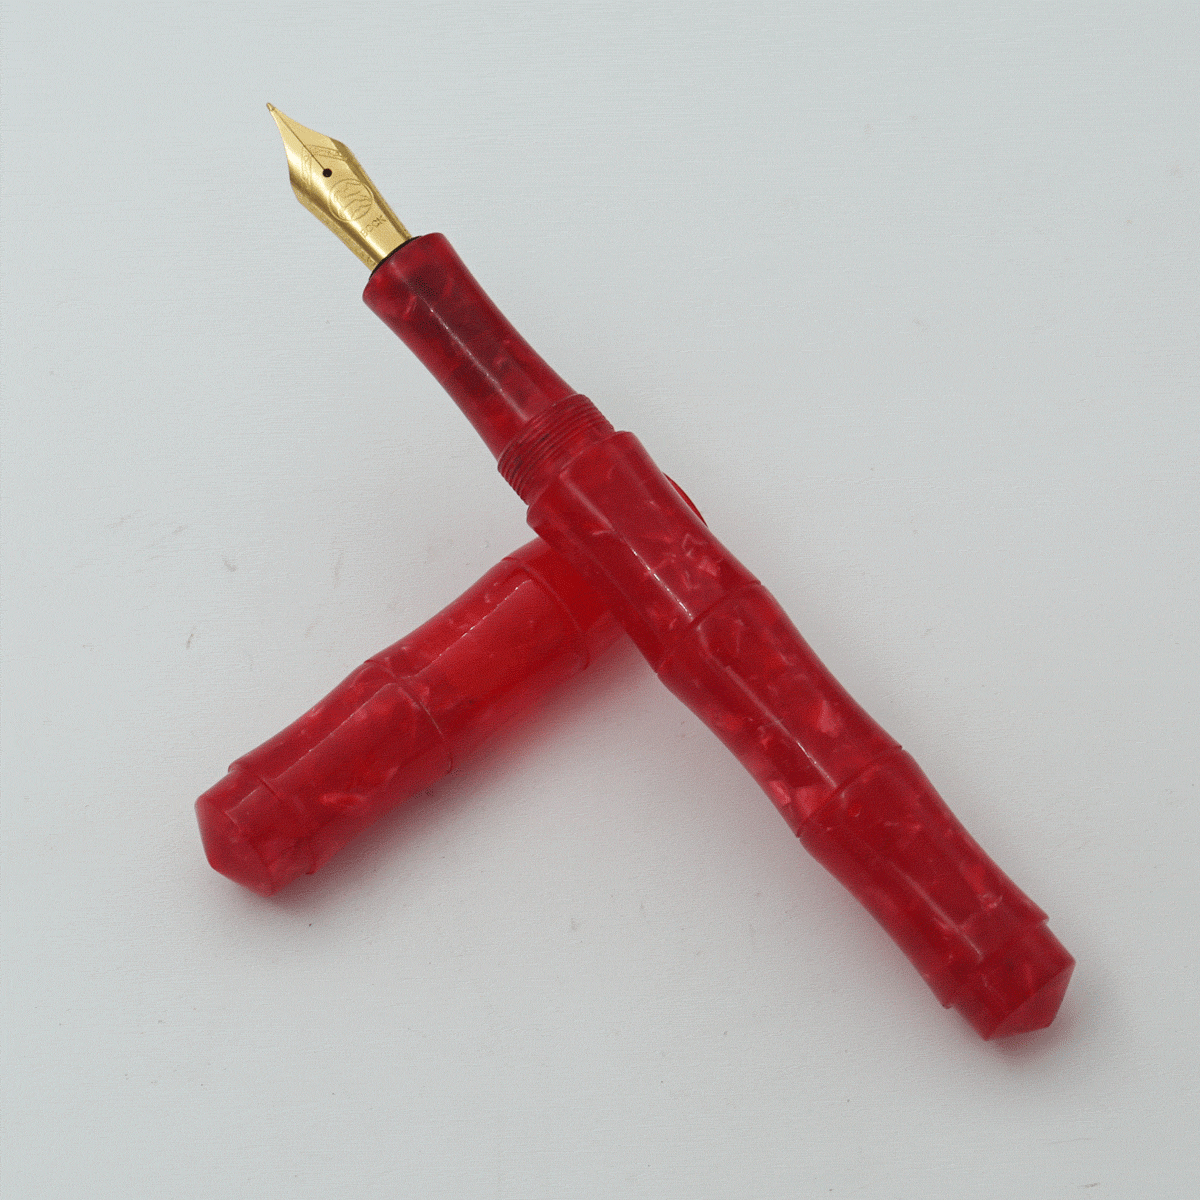 Ranga Handmade Regular Bamboo Model Premium Acrylic P11 Red on Red Cracked Ice Color Body And Without Clip German Bock Nib Converter Type Fountain Pen (Nib Can be Customized With Fine or Medium or Broad) SKU 24289